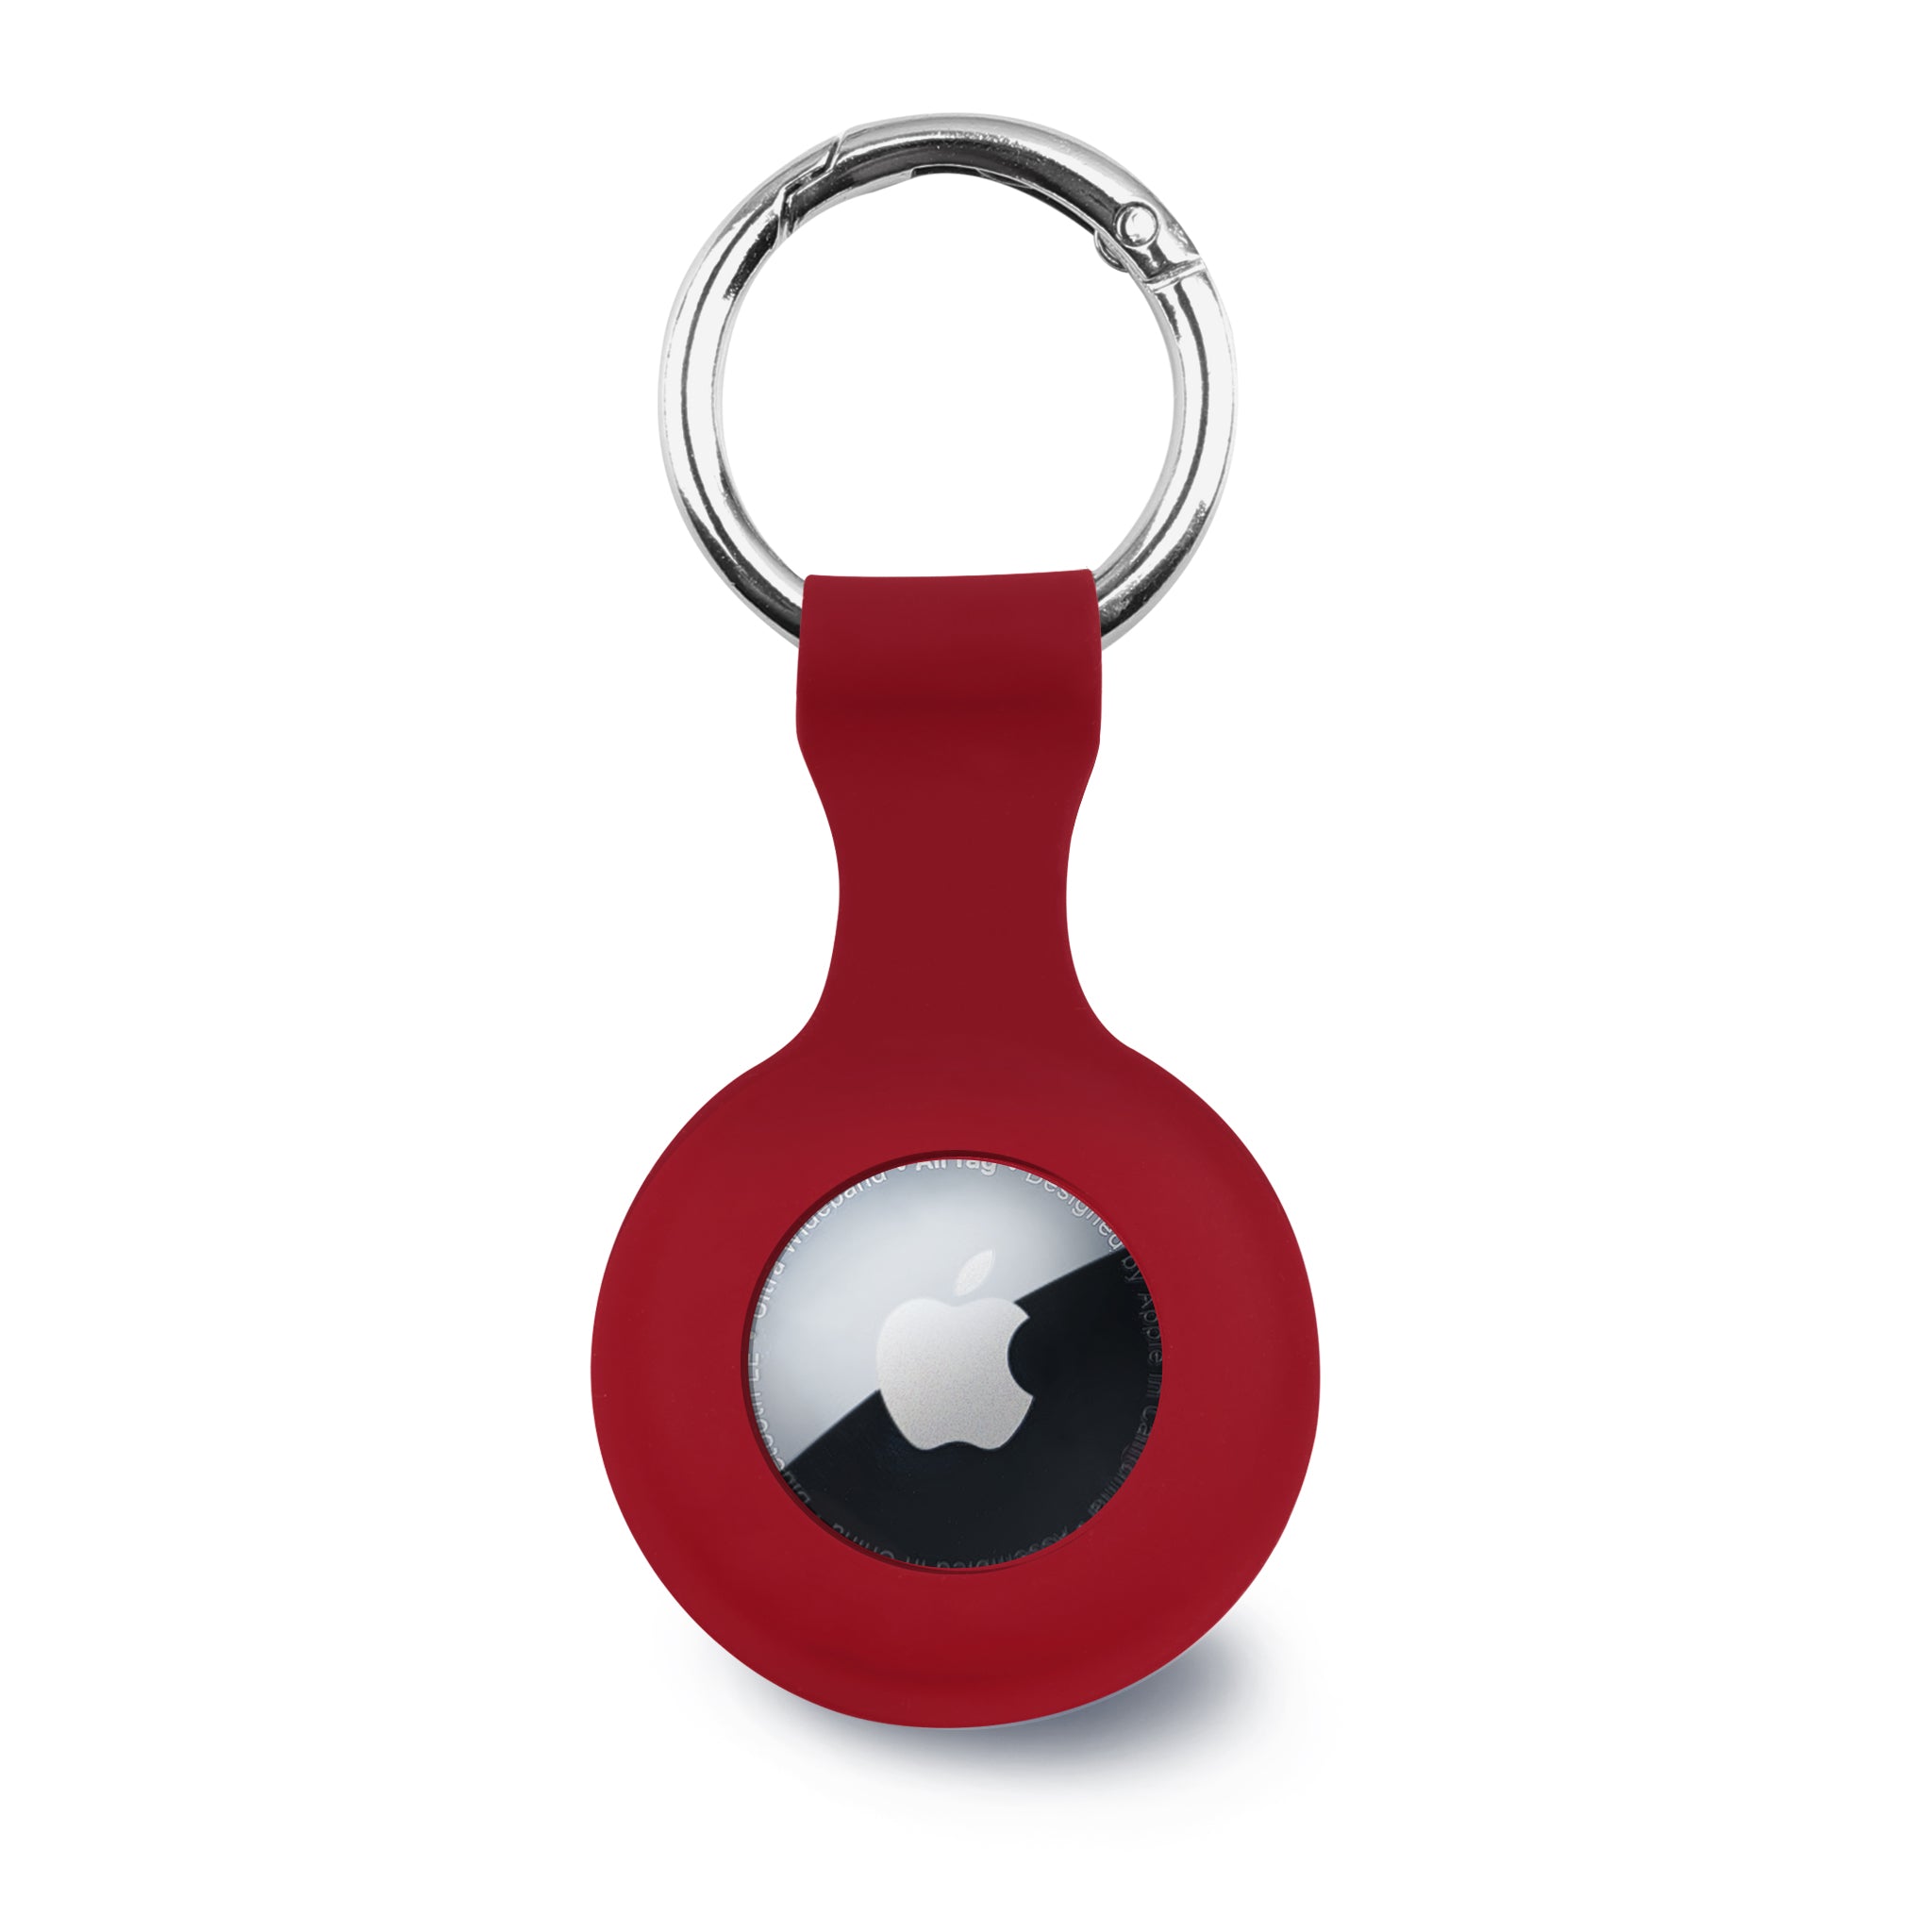 JCPal TagIt Protective AirTag Key Ring, Red